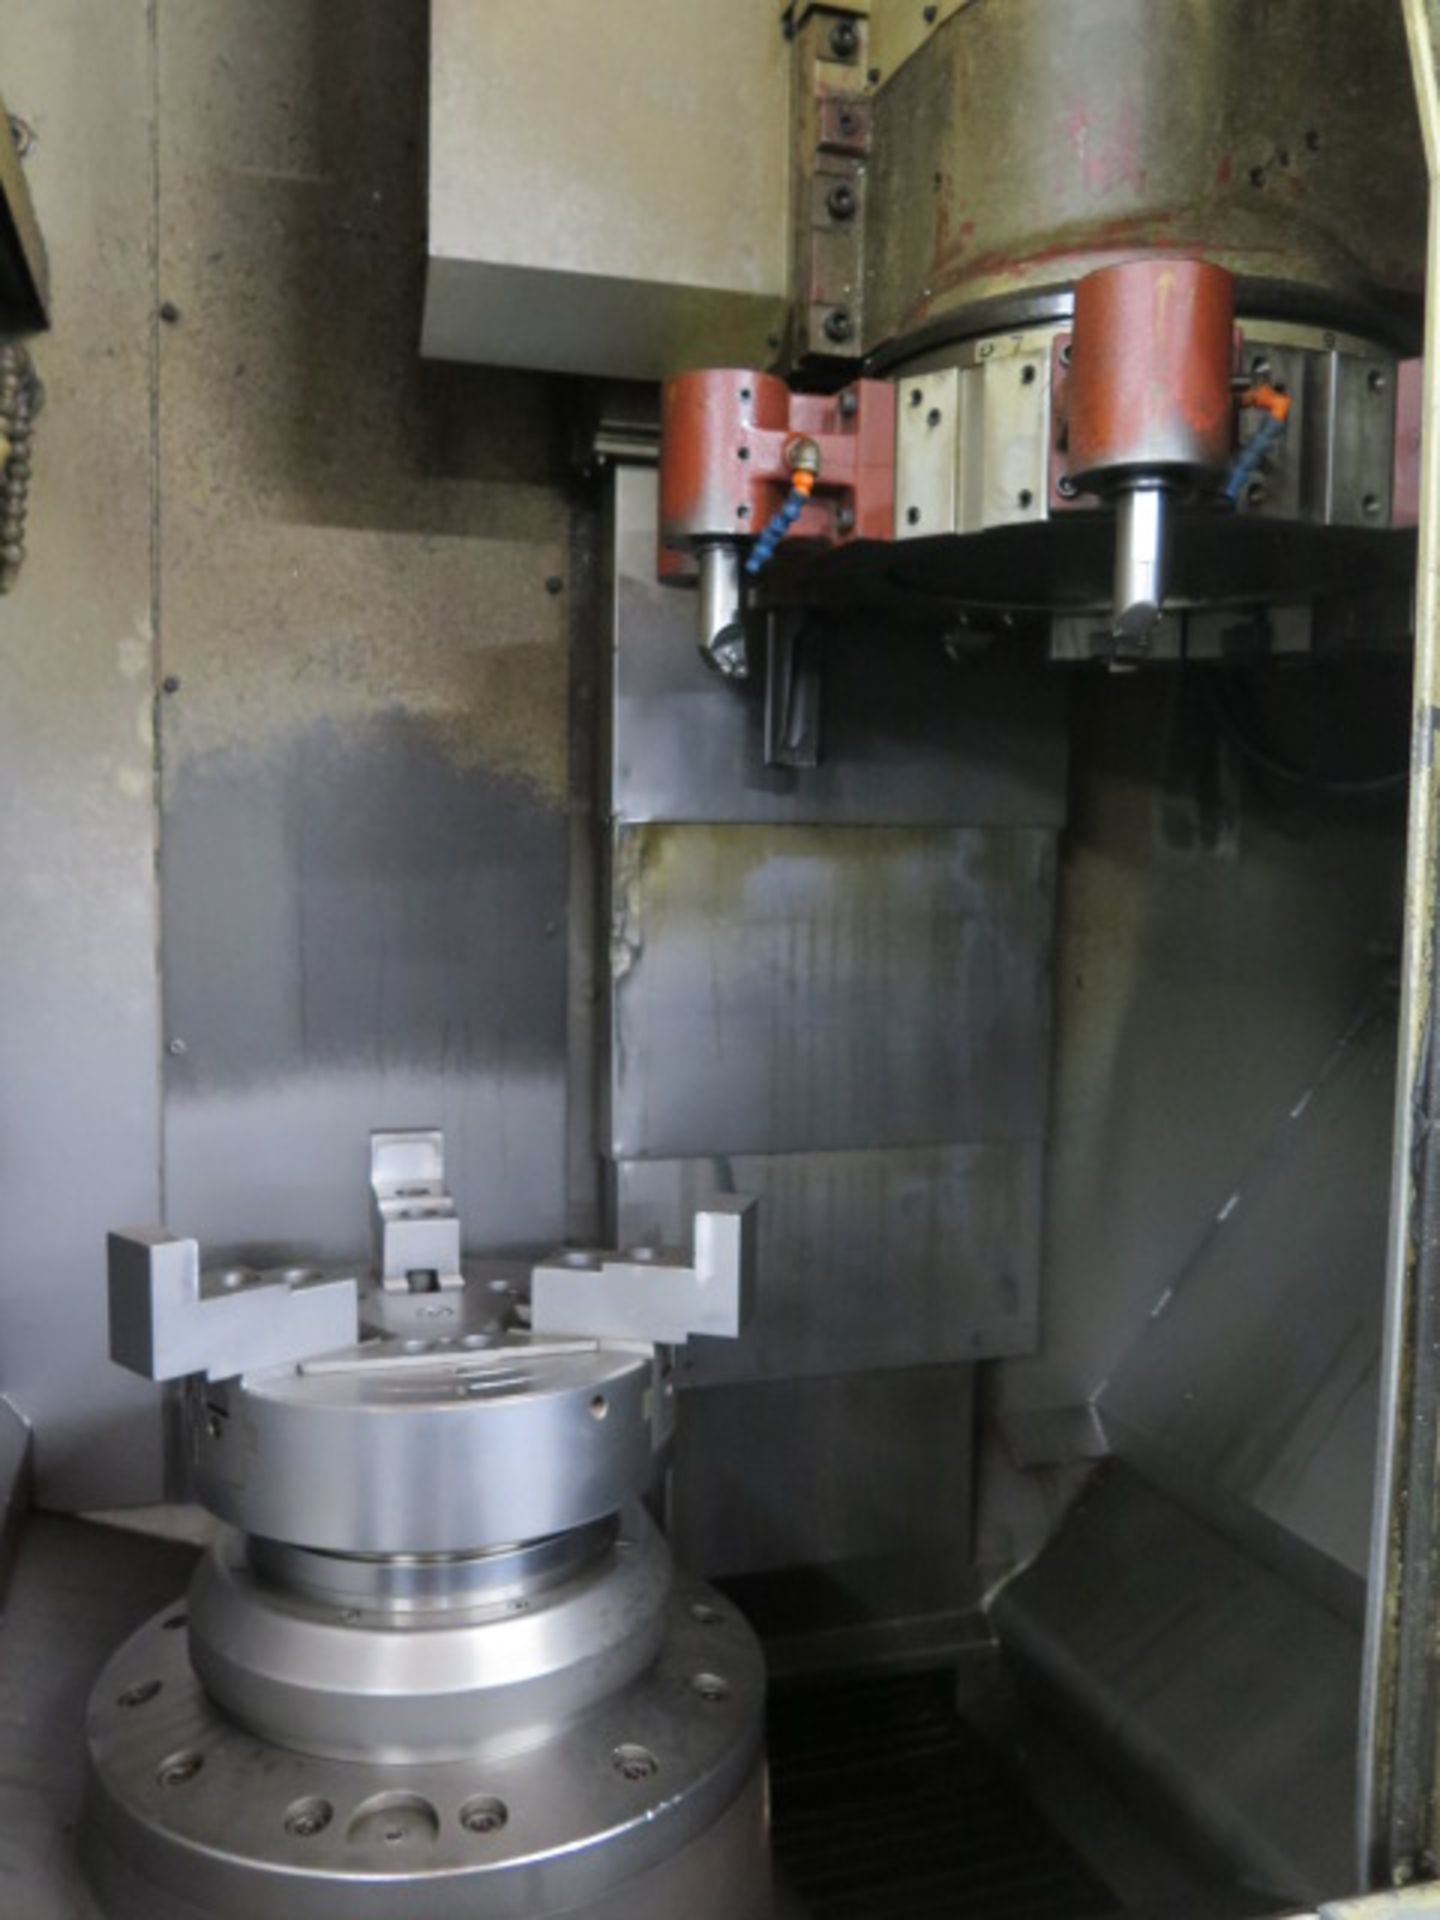 Okuma & Howa 2SP-V55 Twin Spindle CNC Vertical Turning Center s/n 55095 (8011) w/ Fanuc Series 18- - Image 6 of 9